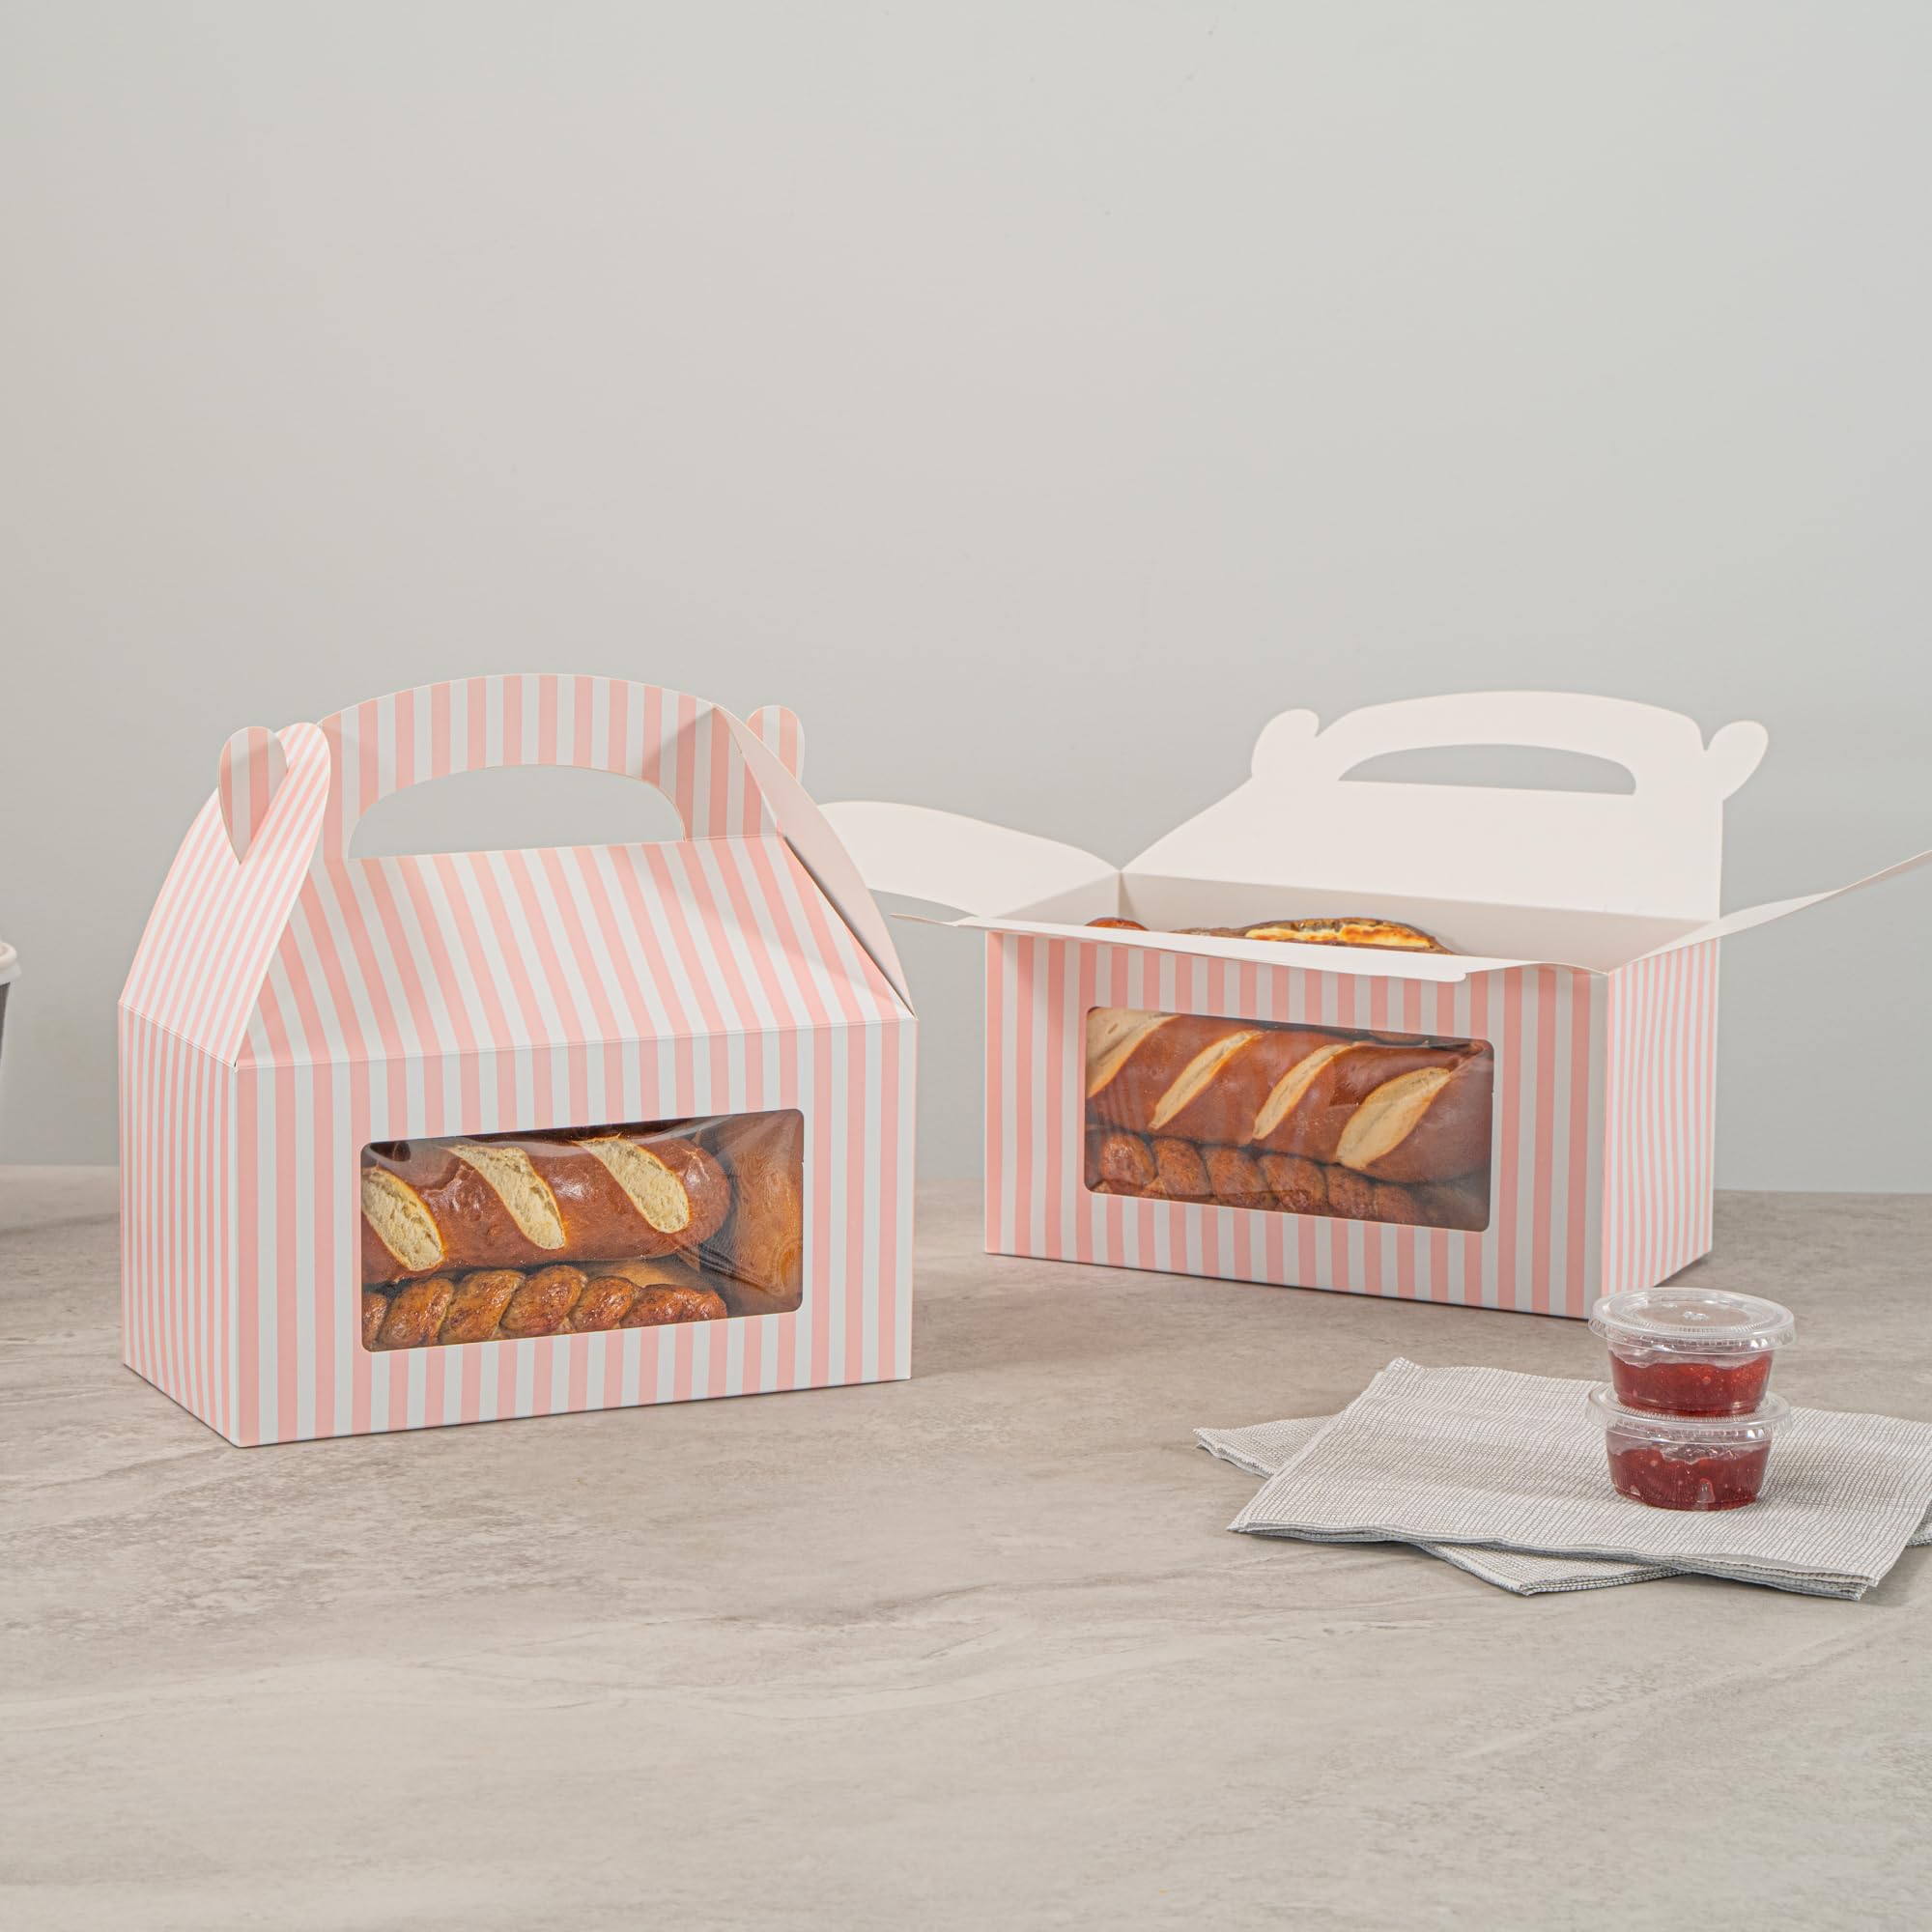 Bio Tek 9.5 x 5 x 5 Inch Gable Boxes For Party Favors, 25 Durable Gift Treat Boxes - Striped Pattern, Clear PET Window, Pink & White Paper Barn Boxes, With Built-In Handle - Restaurantware